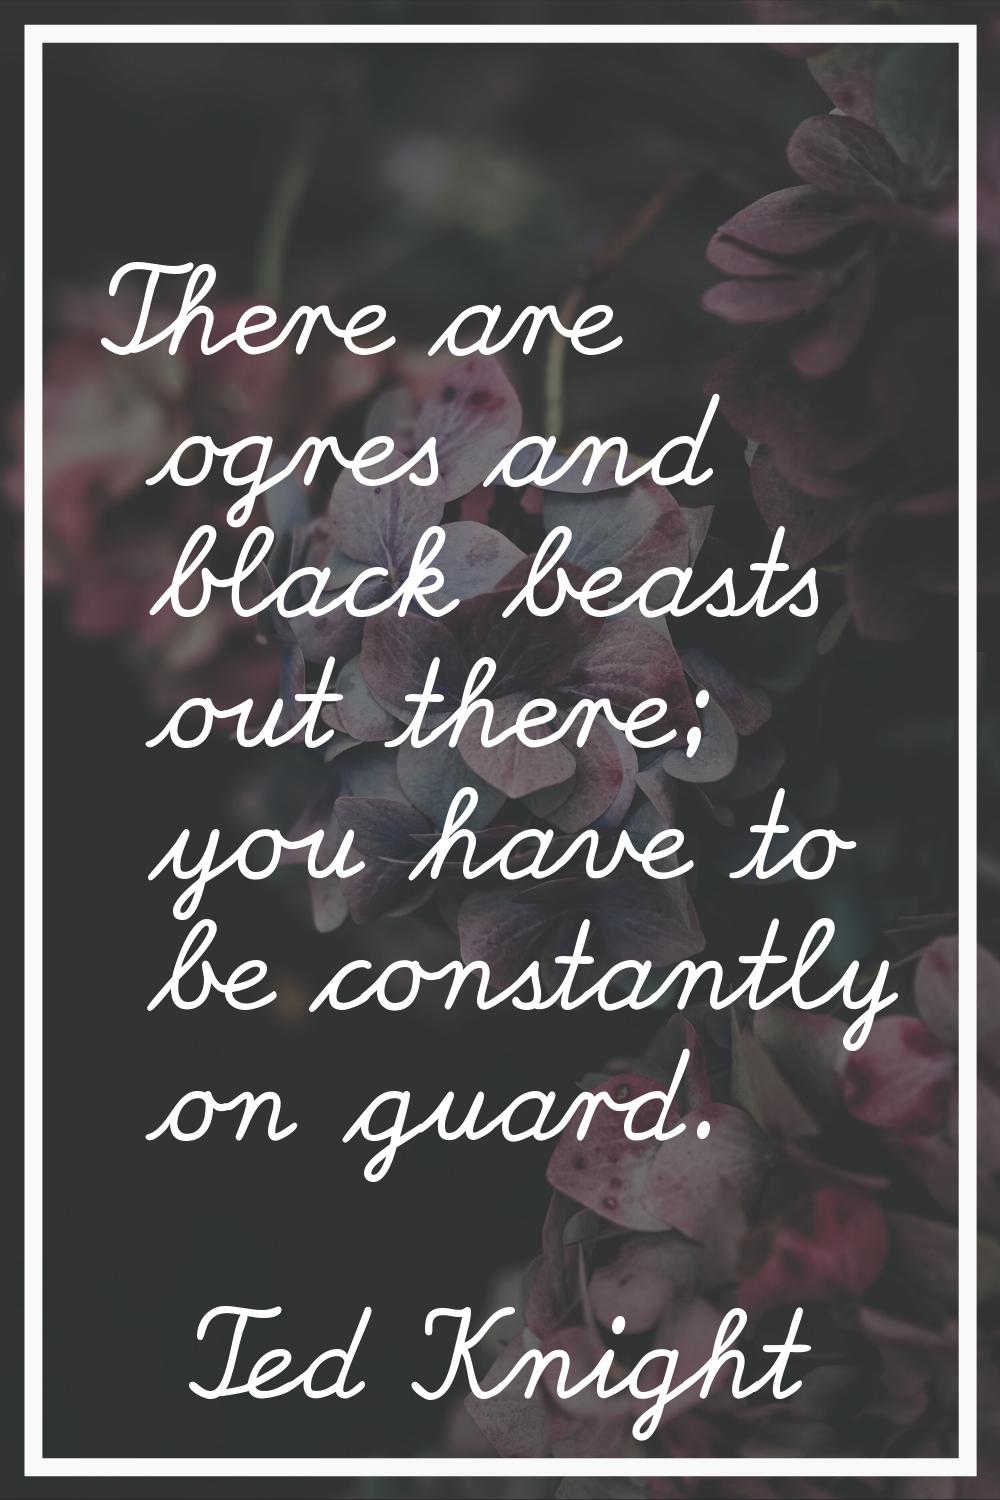 There are ogres and black beasts out there; you have to be constantly on guard.